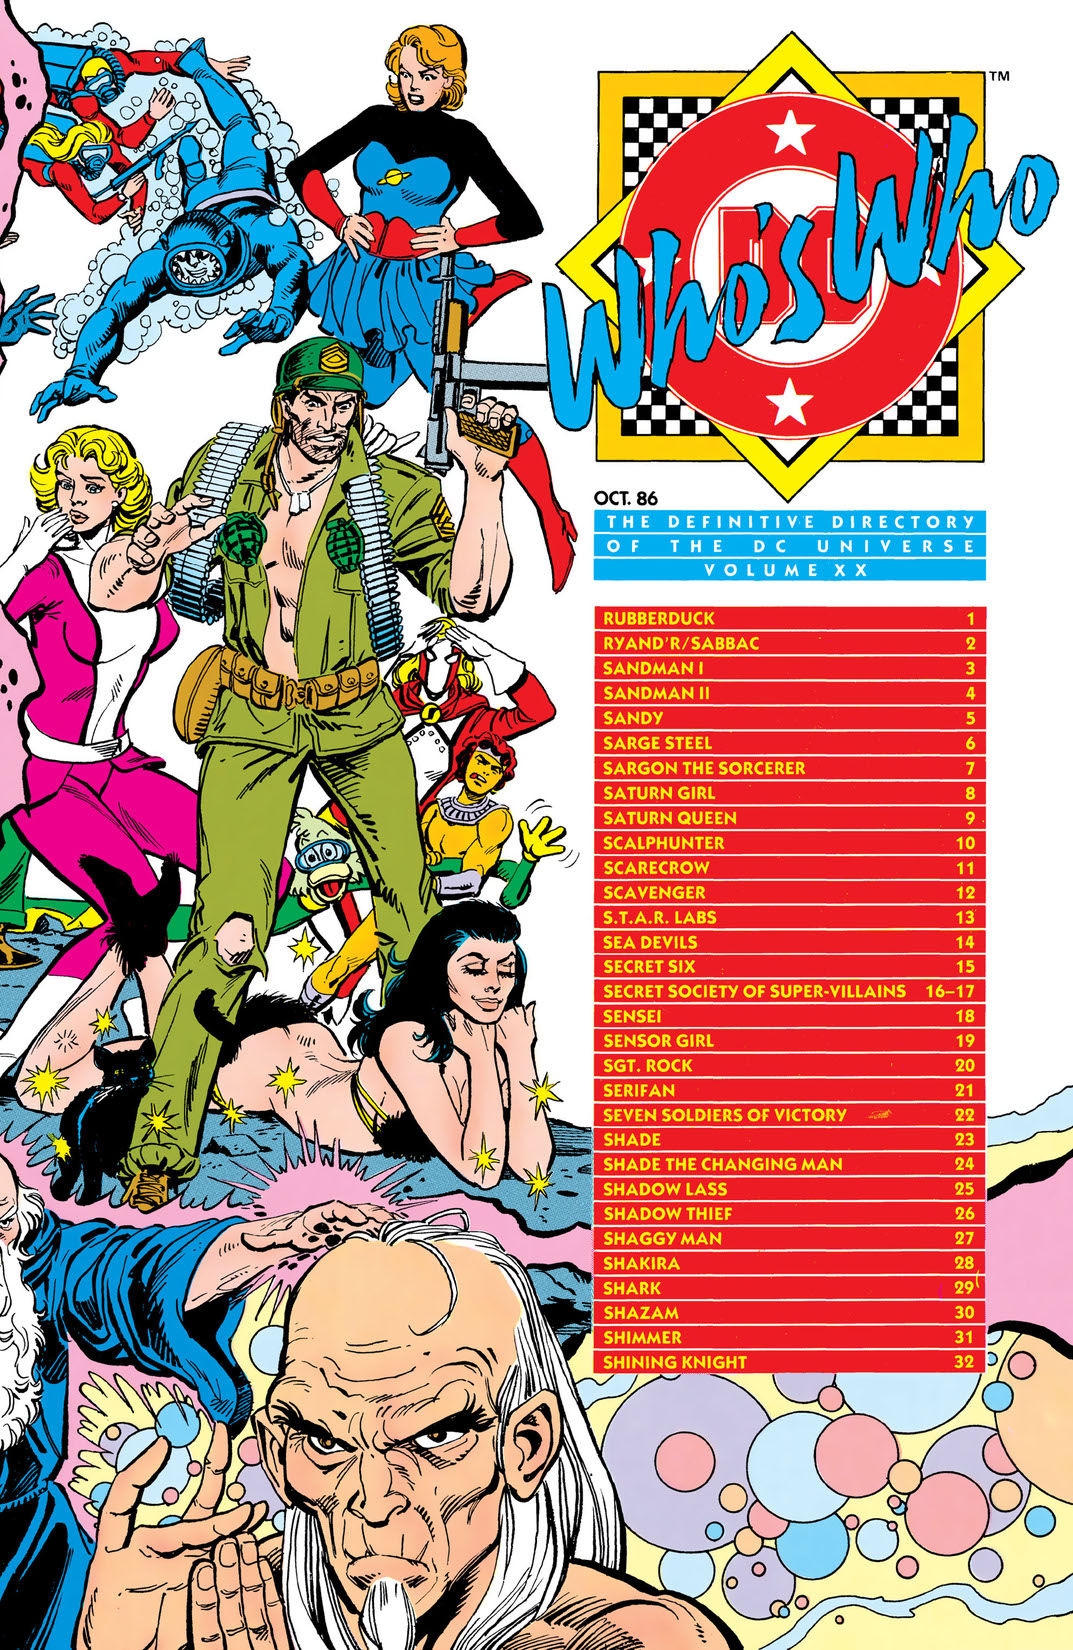 Who's Who: The Definitive Directory of the DC Universe #20 preview images